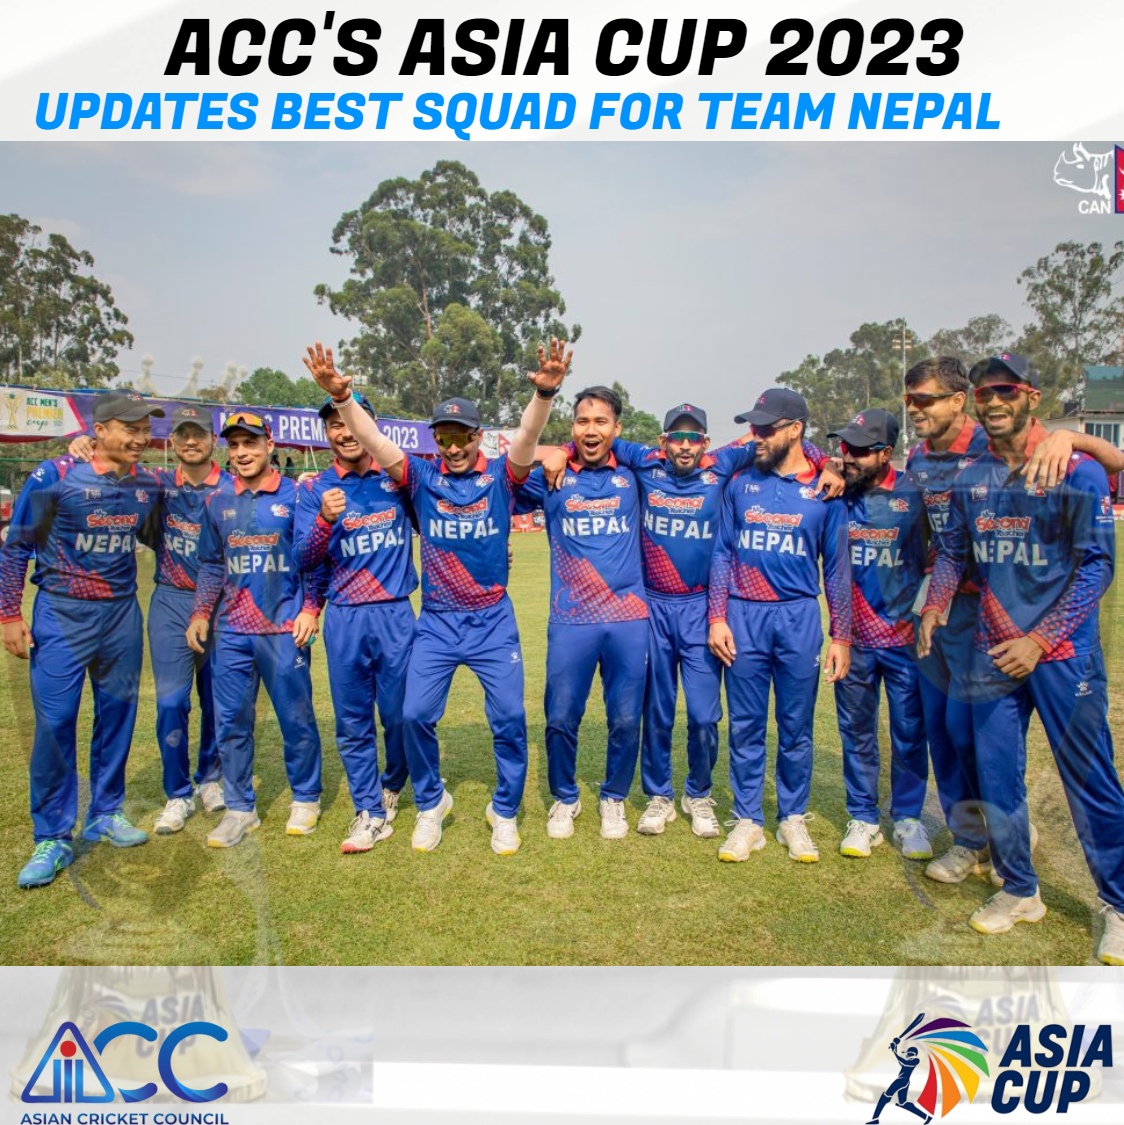 Asia Cup NEPAL SQUAD 2023